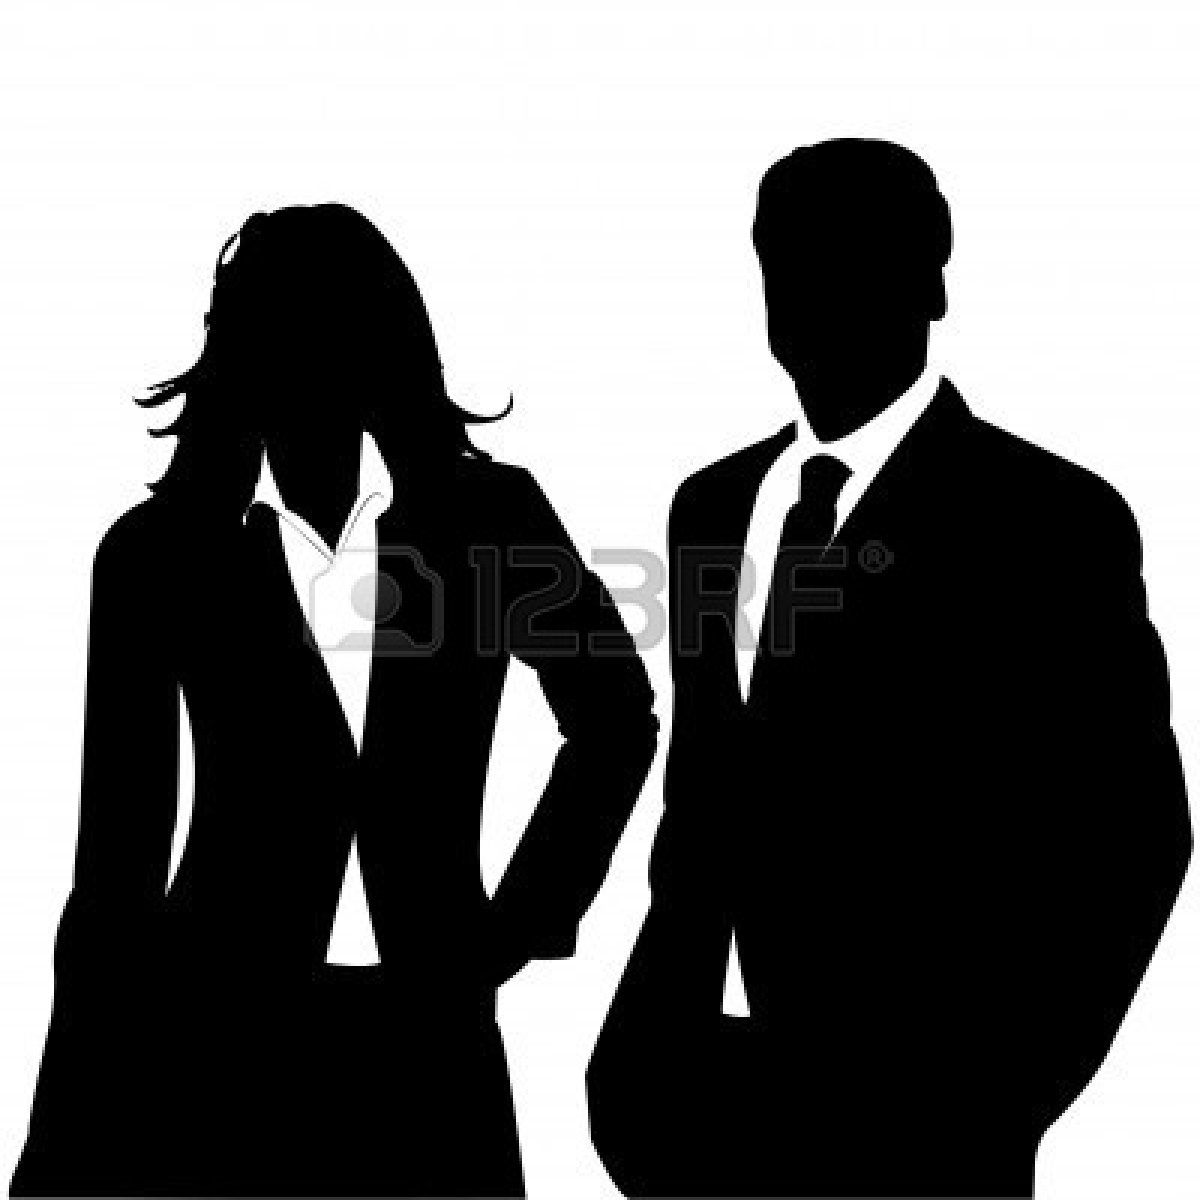 People Clipart Silhouette Business   Clipart Panda   Free Clipart    